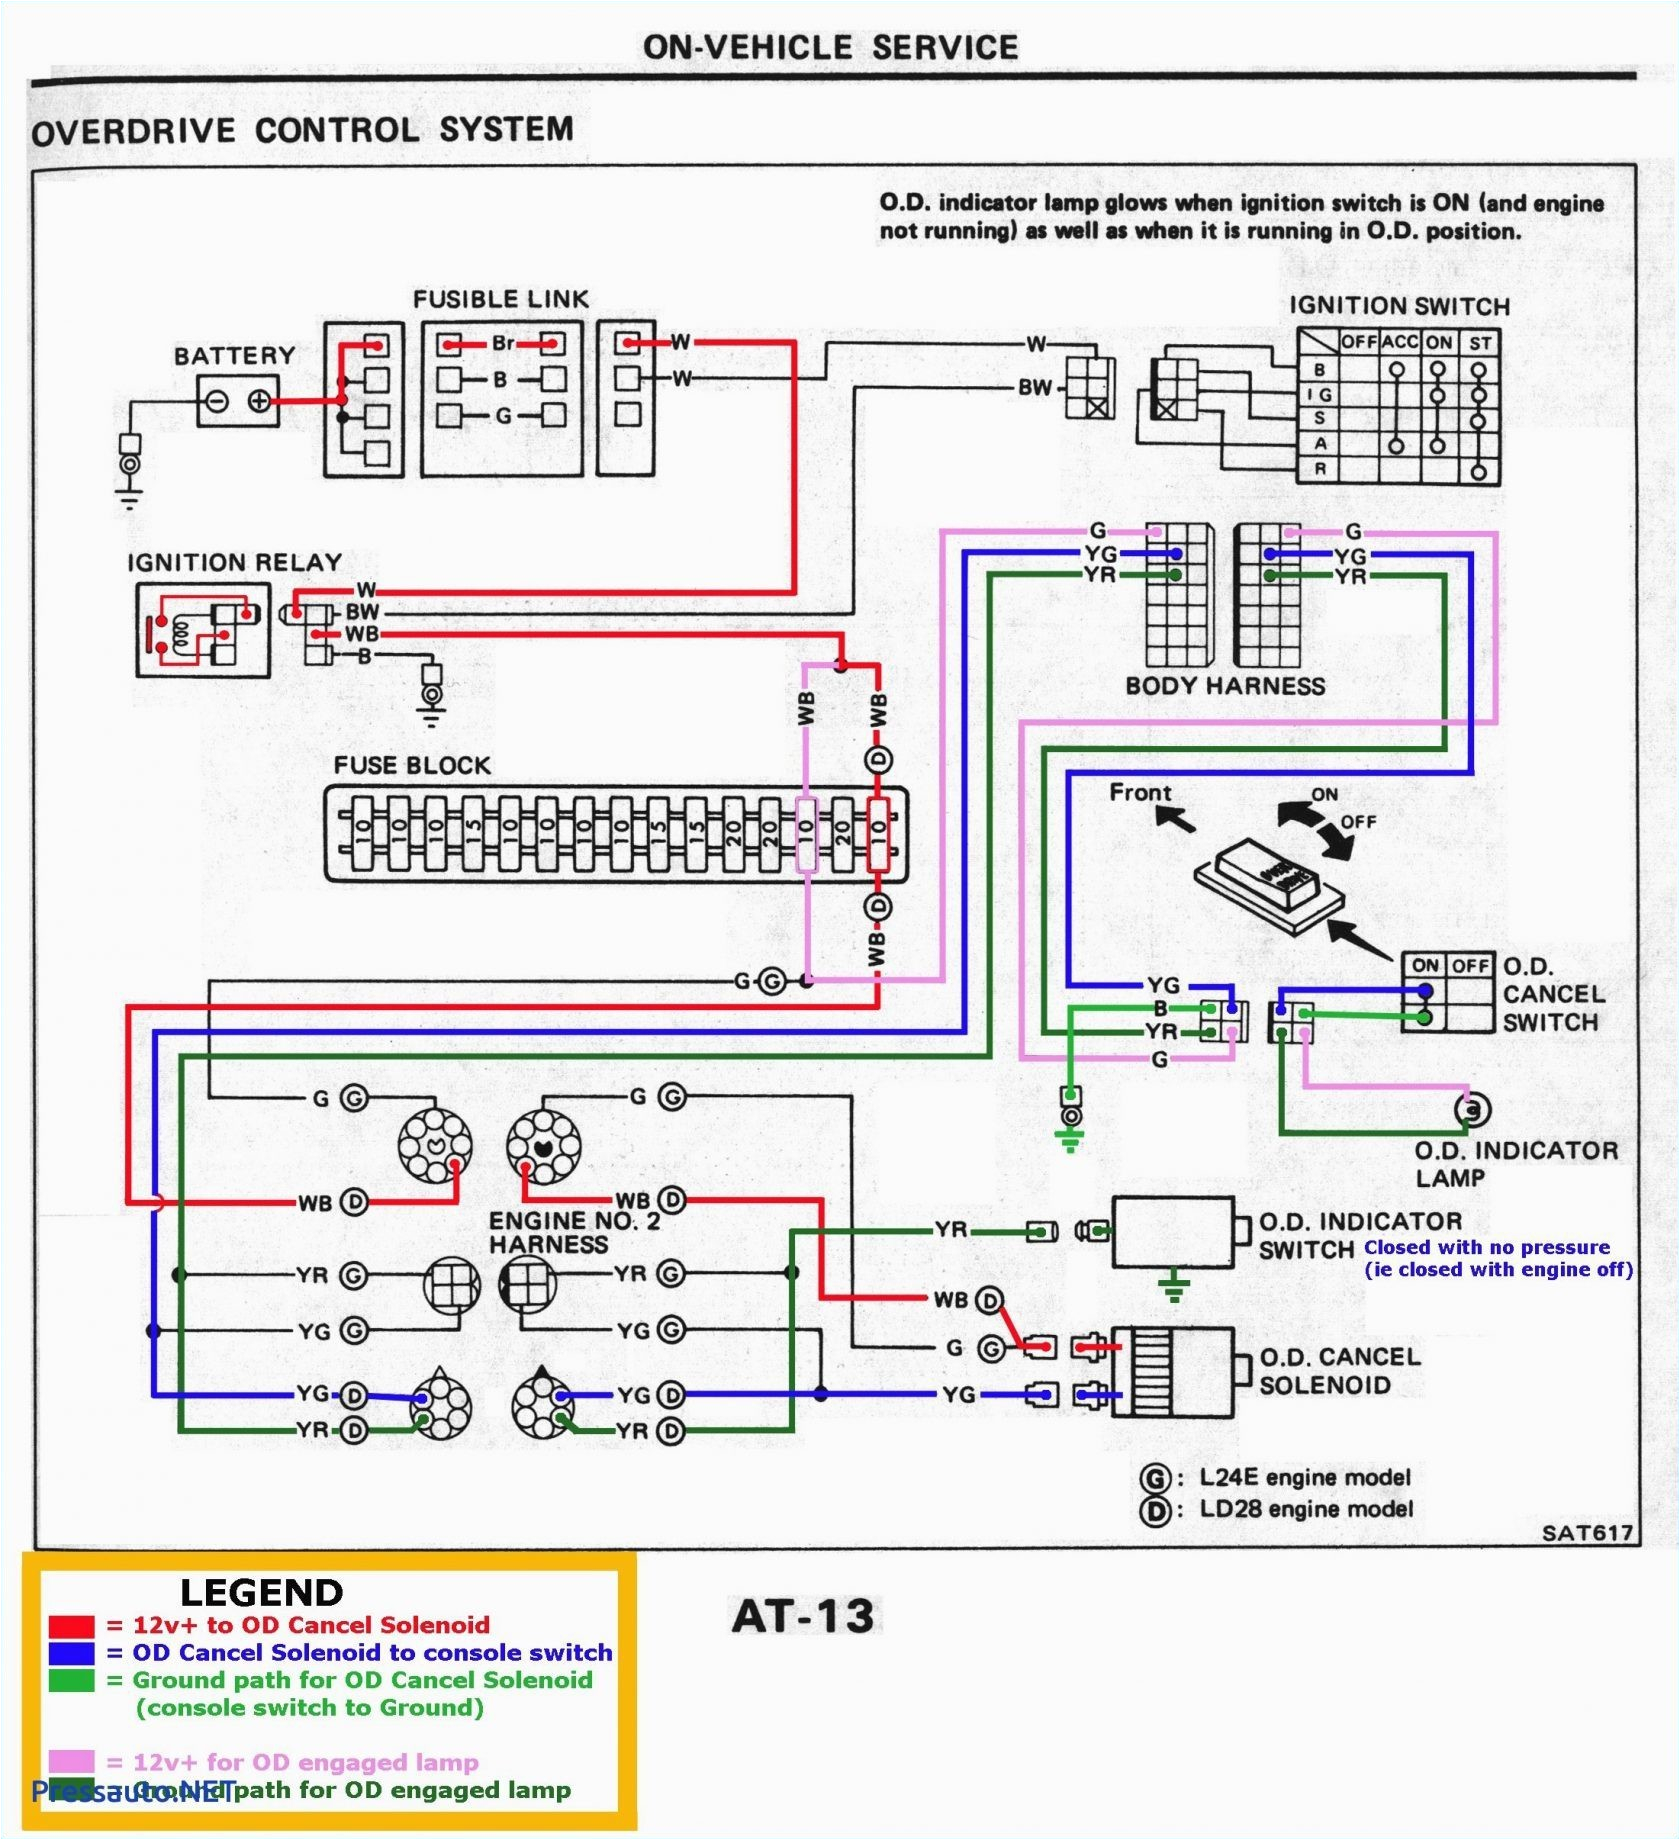 keys can wiring diagram wiring diagrams structure diagram also circuit ladder diagrams on keyscan access control wiring